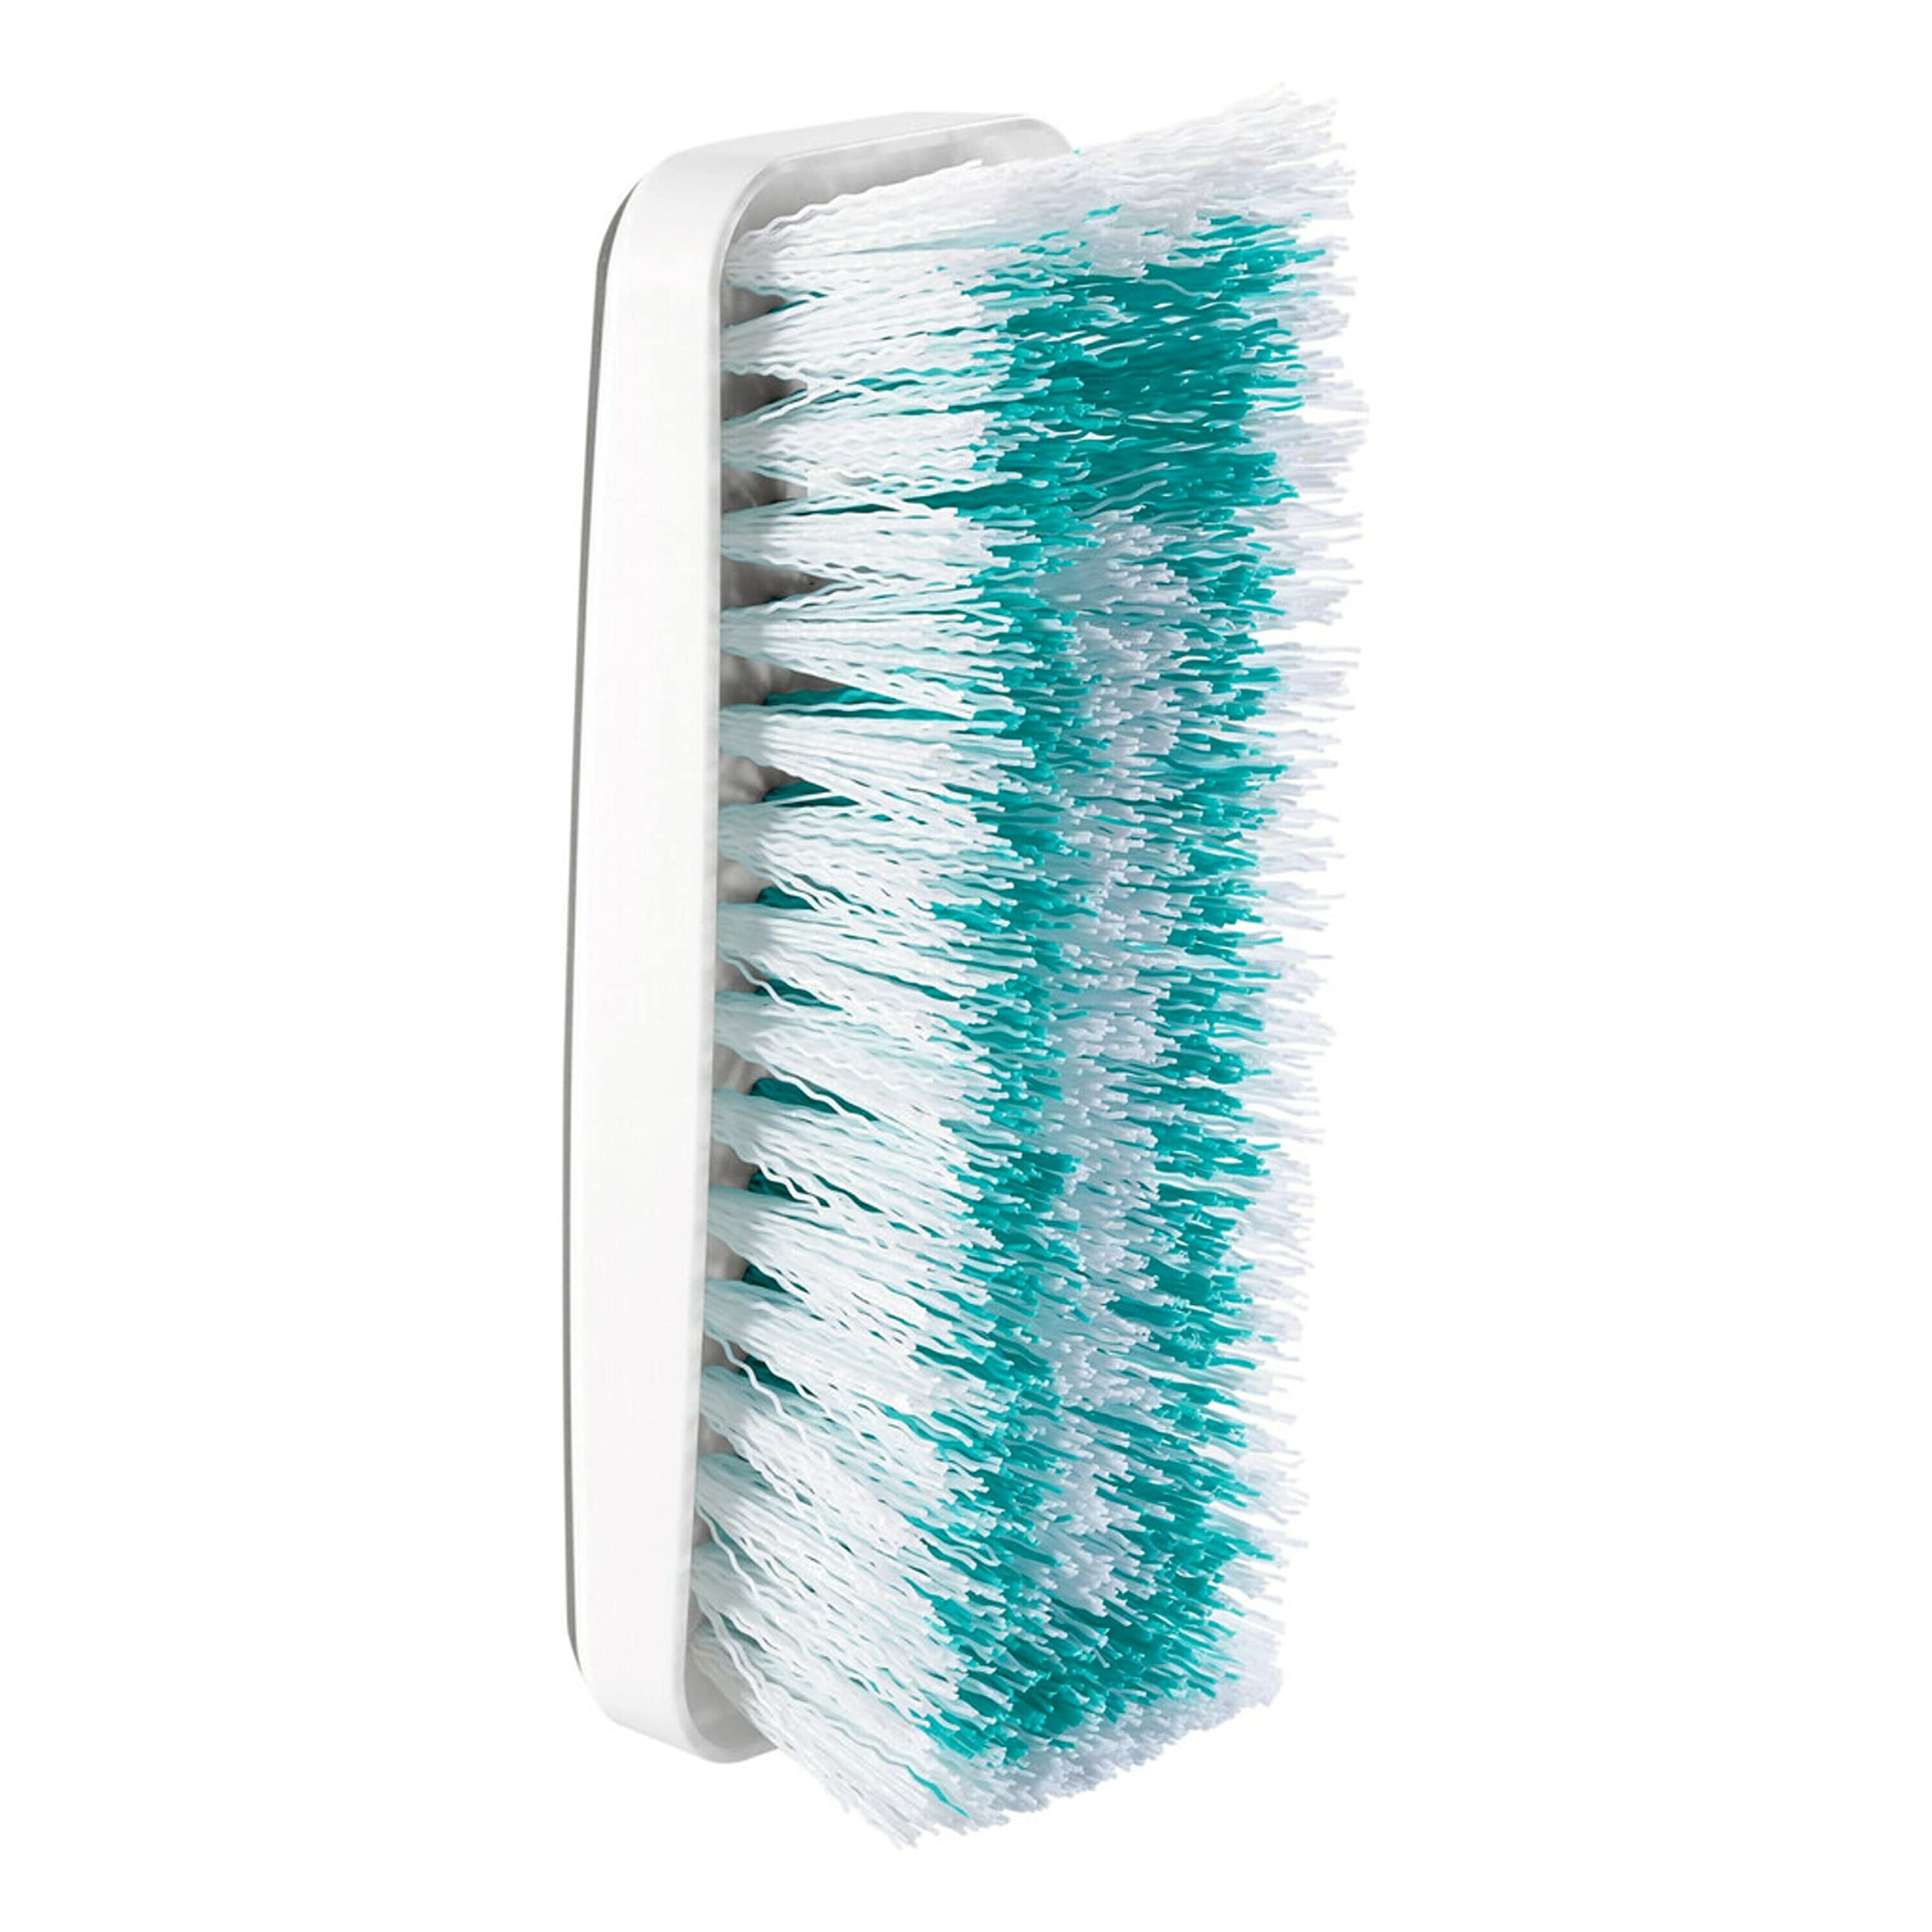 Scotch-Brite Deep Clean Brush, For Tile Floors and Walls, Shower Doors, Tubs, and More